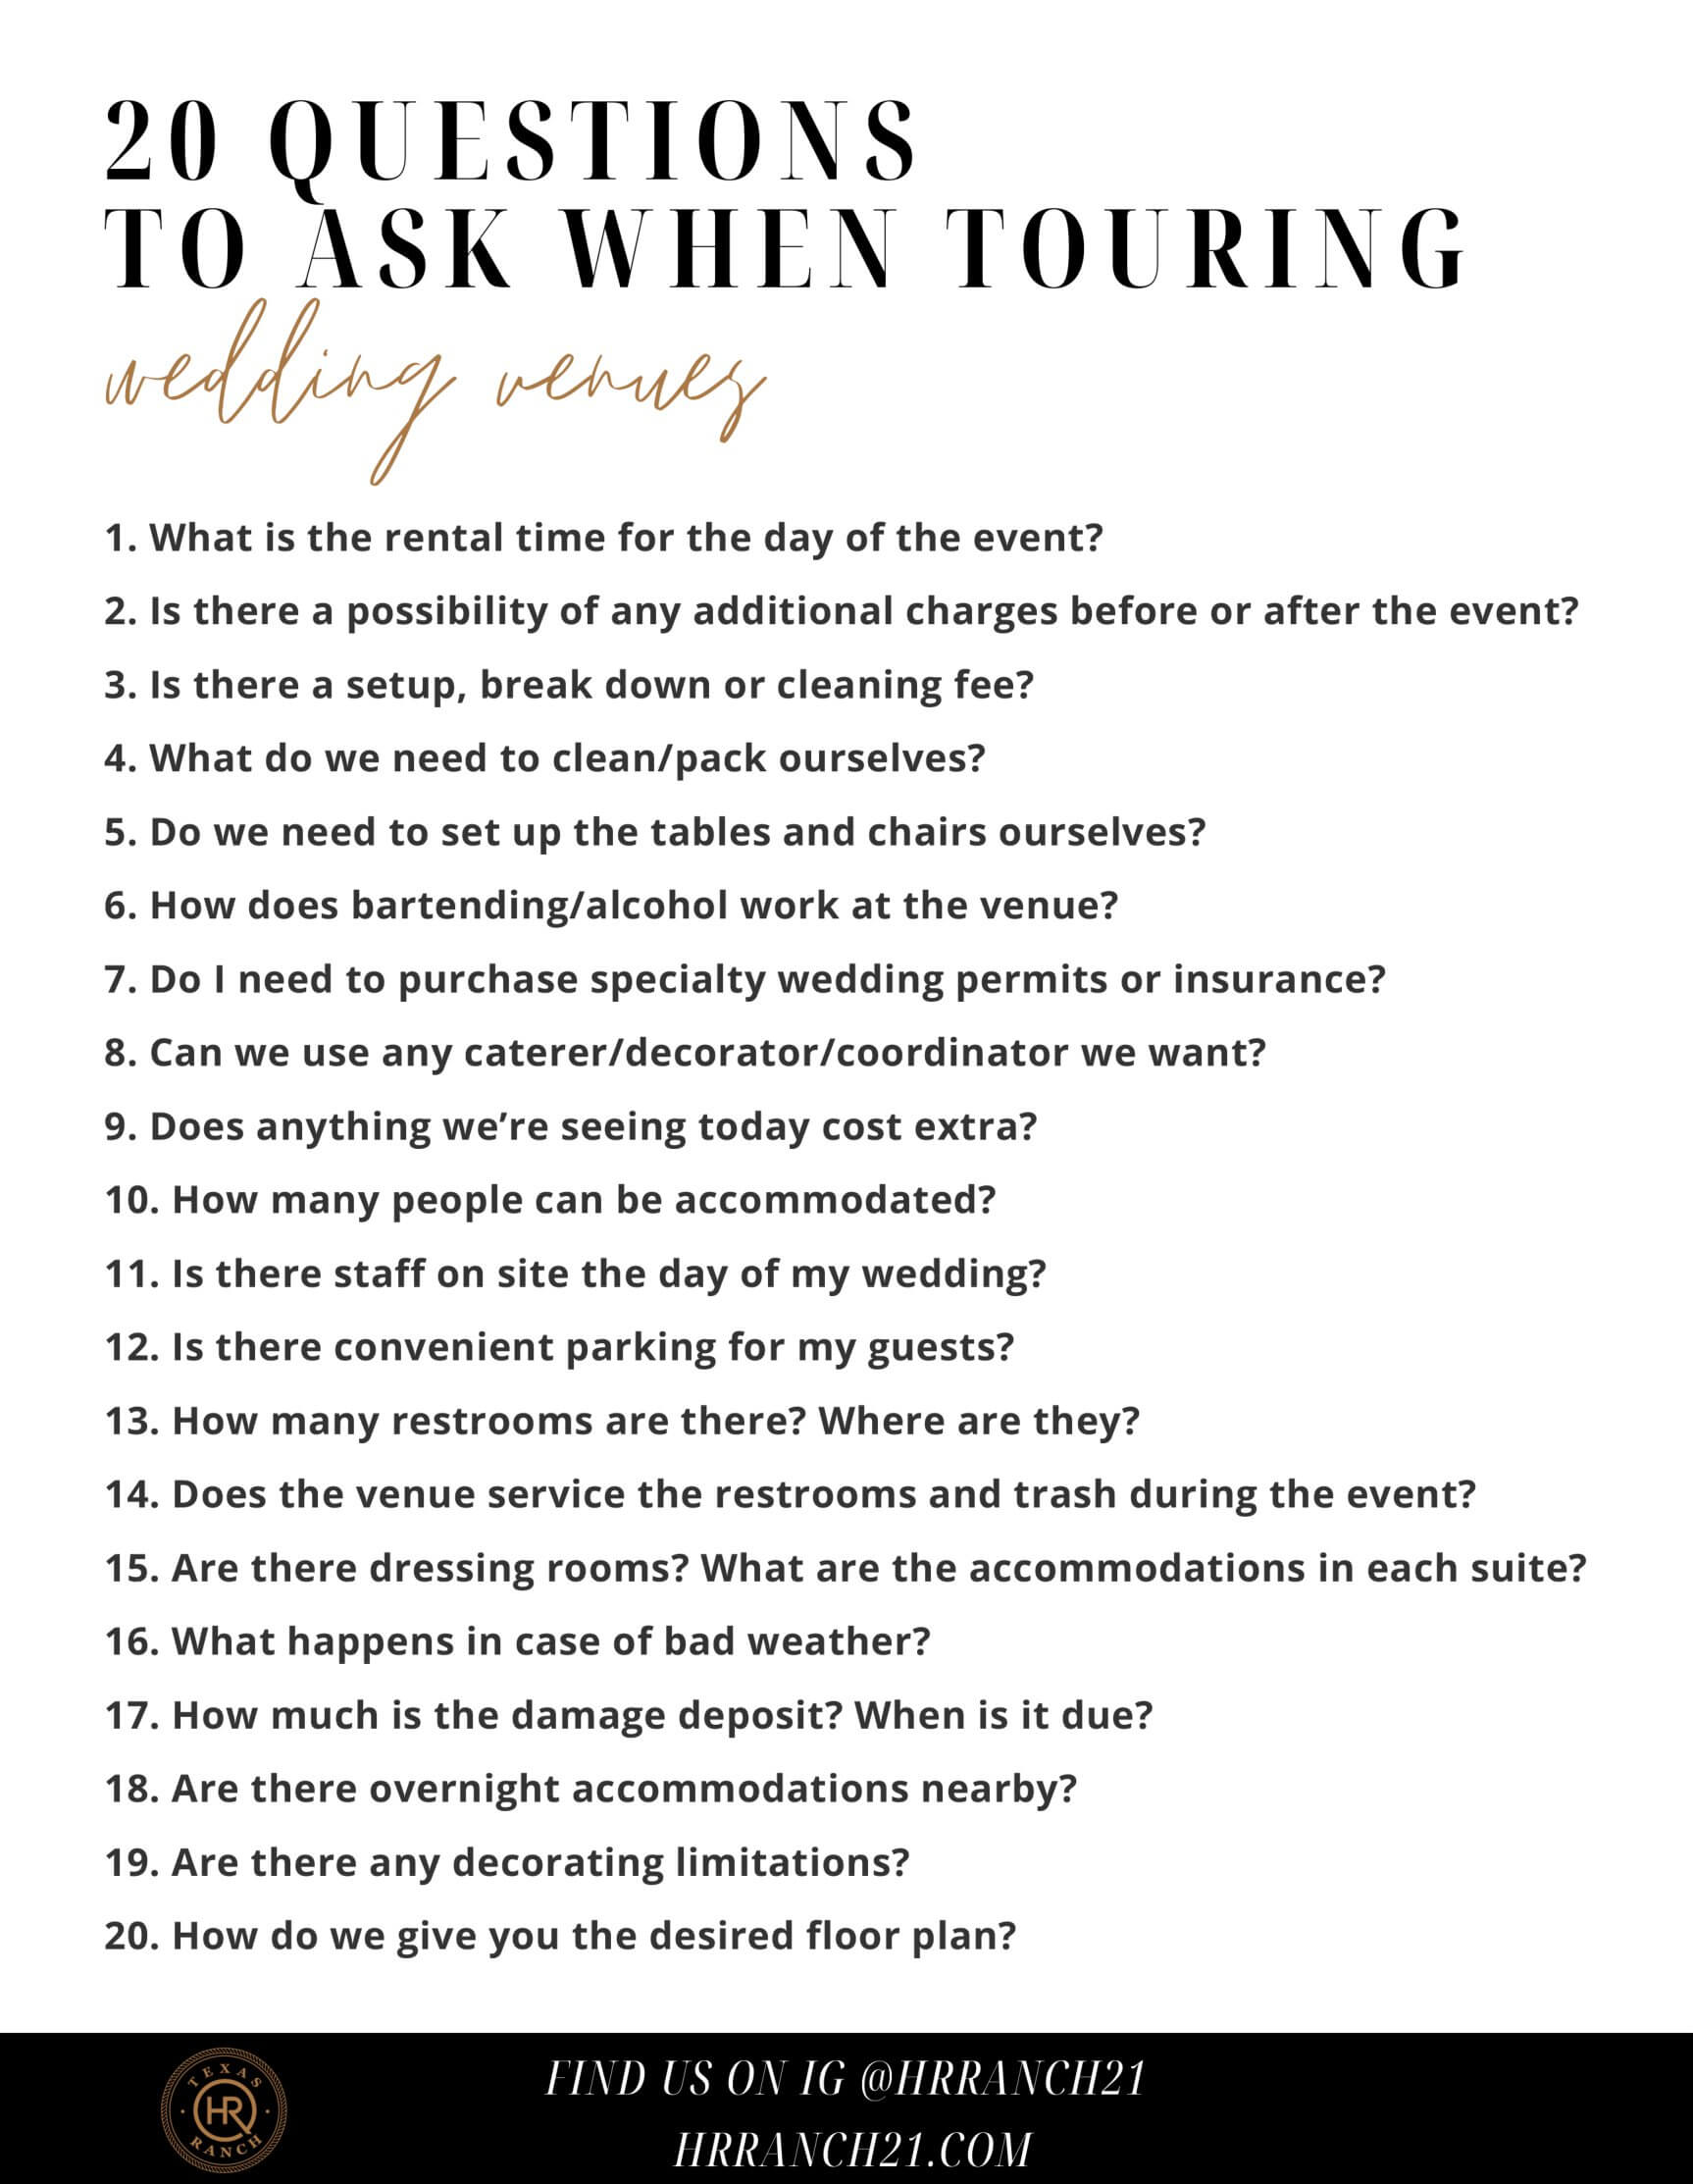 20 questions to ask